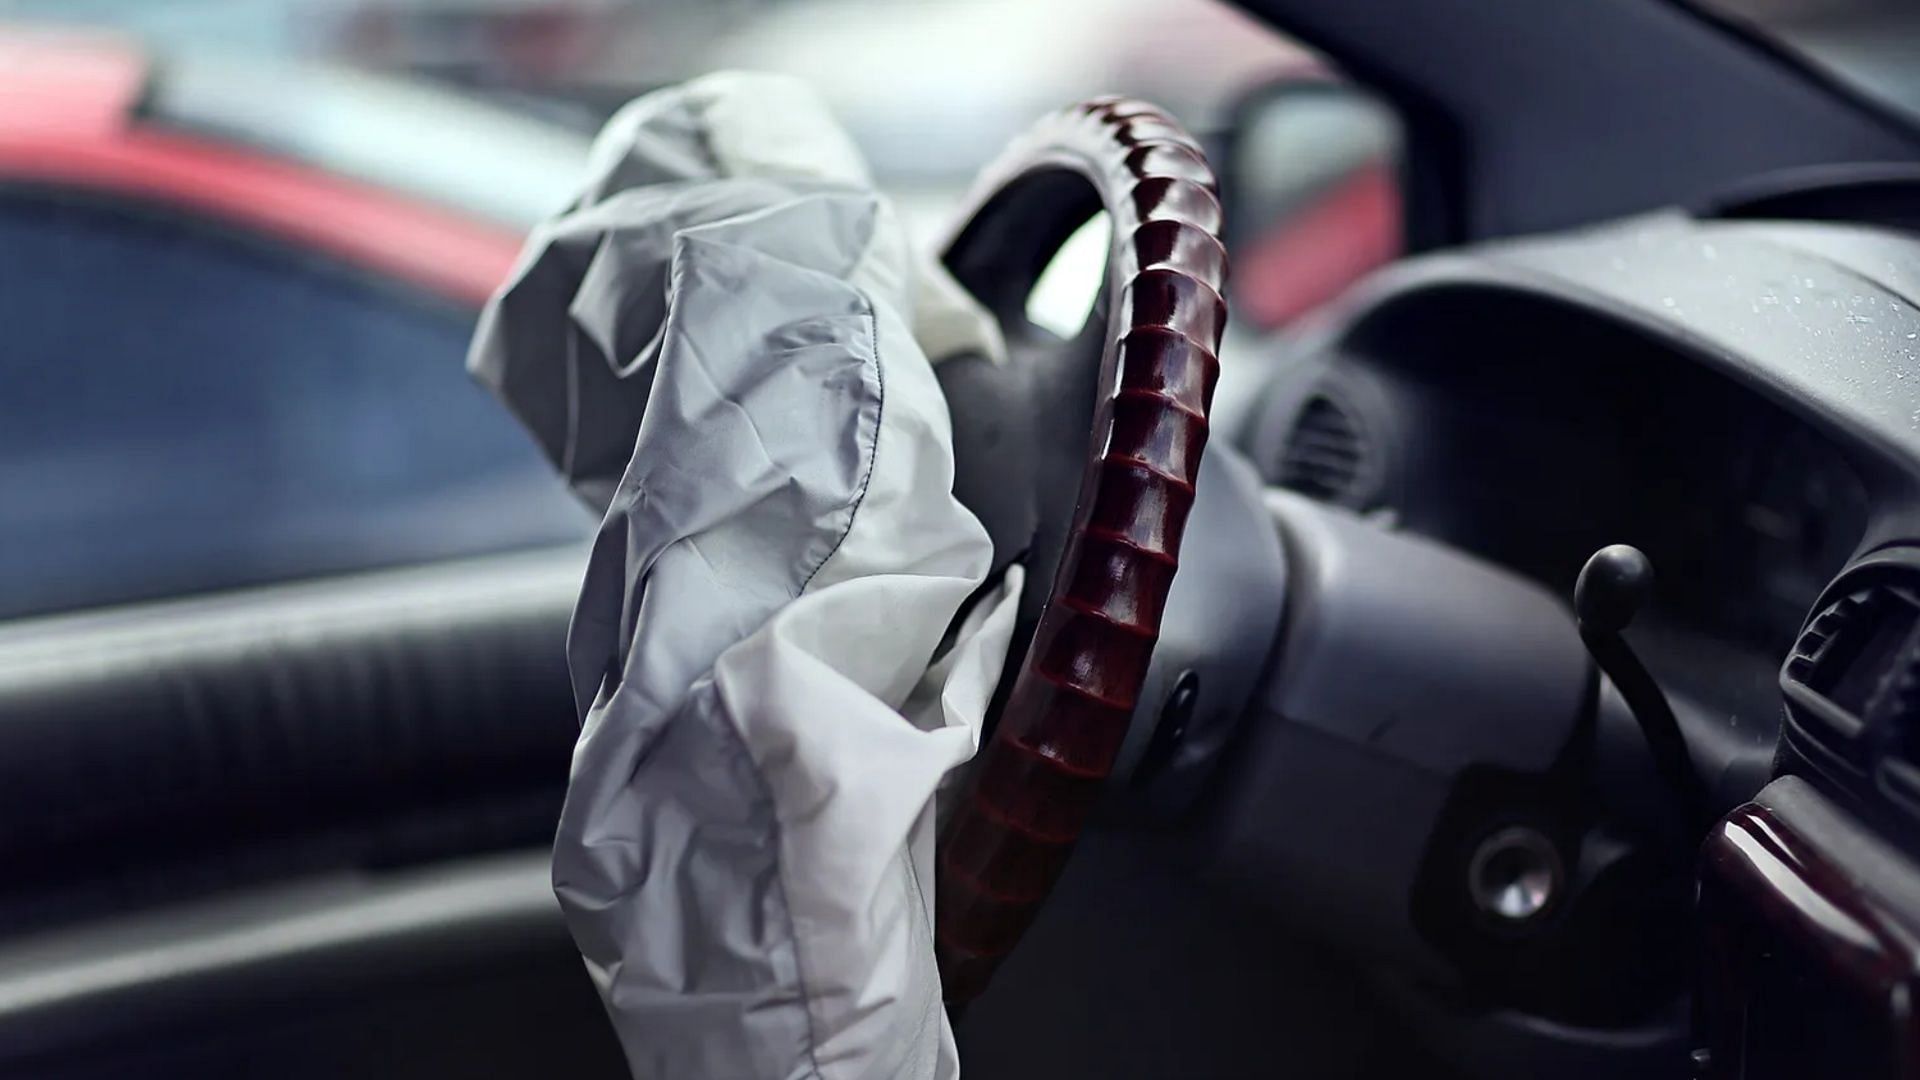 Federal regulators in the U.S. take steps towards forcing a recall for 52 million airbag inflators over rupture and injury concerns (Image via Joe Raedle / Getty Images)